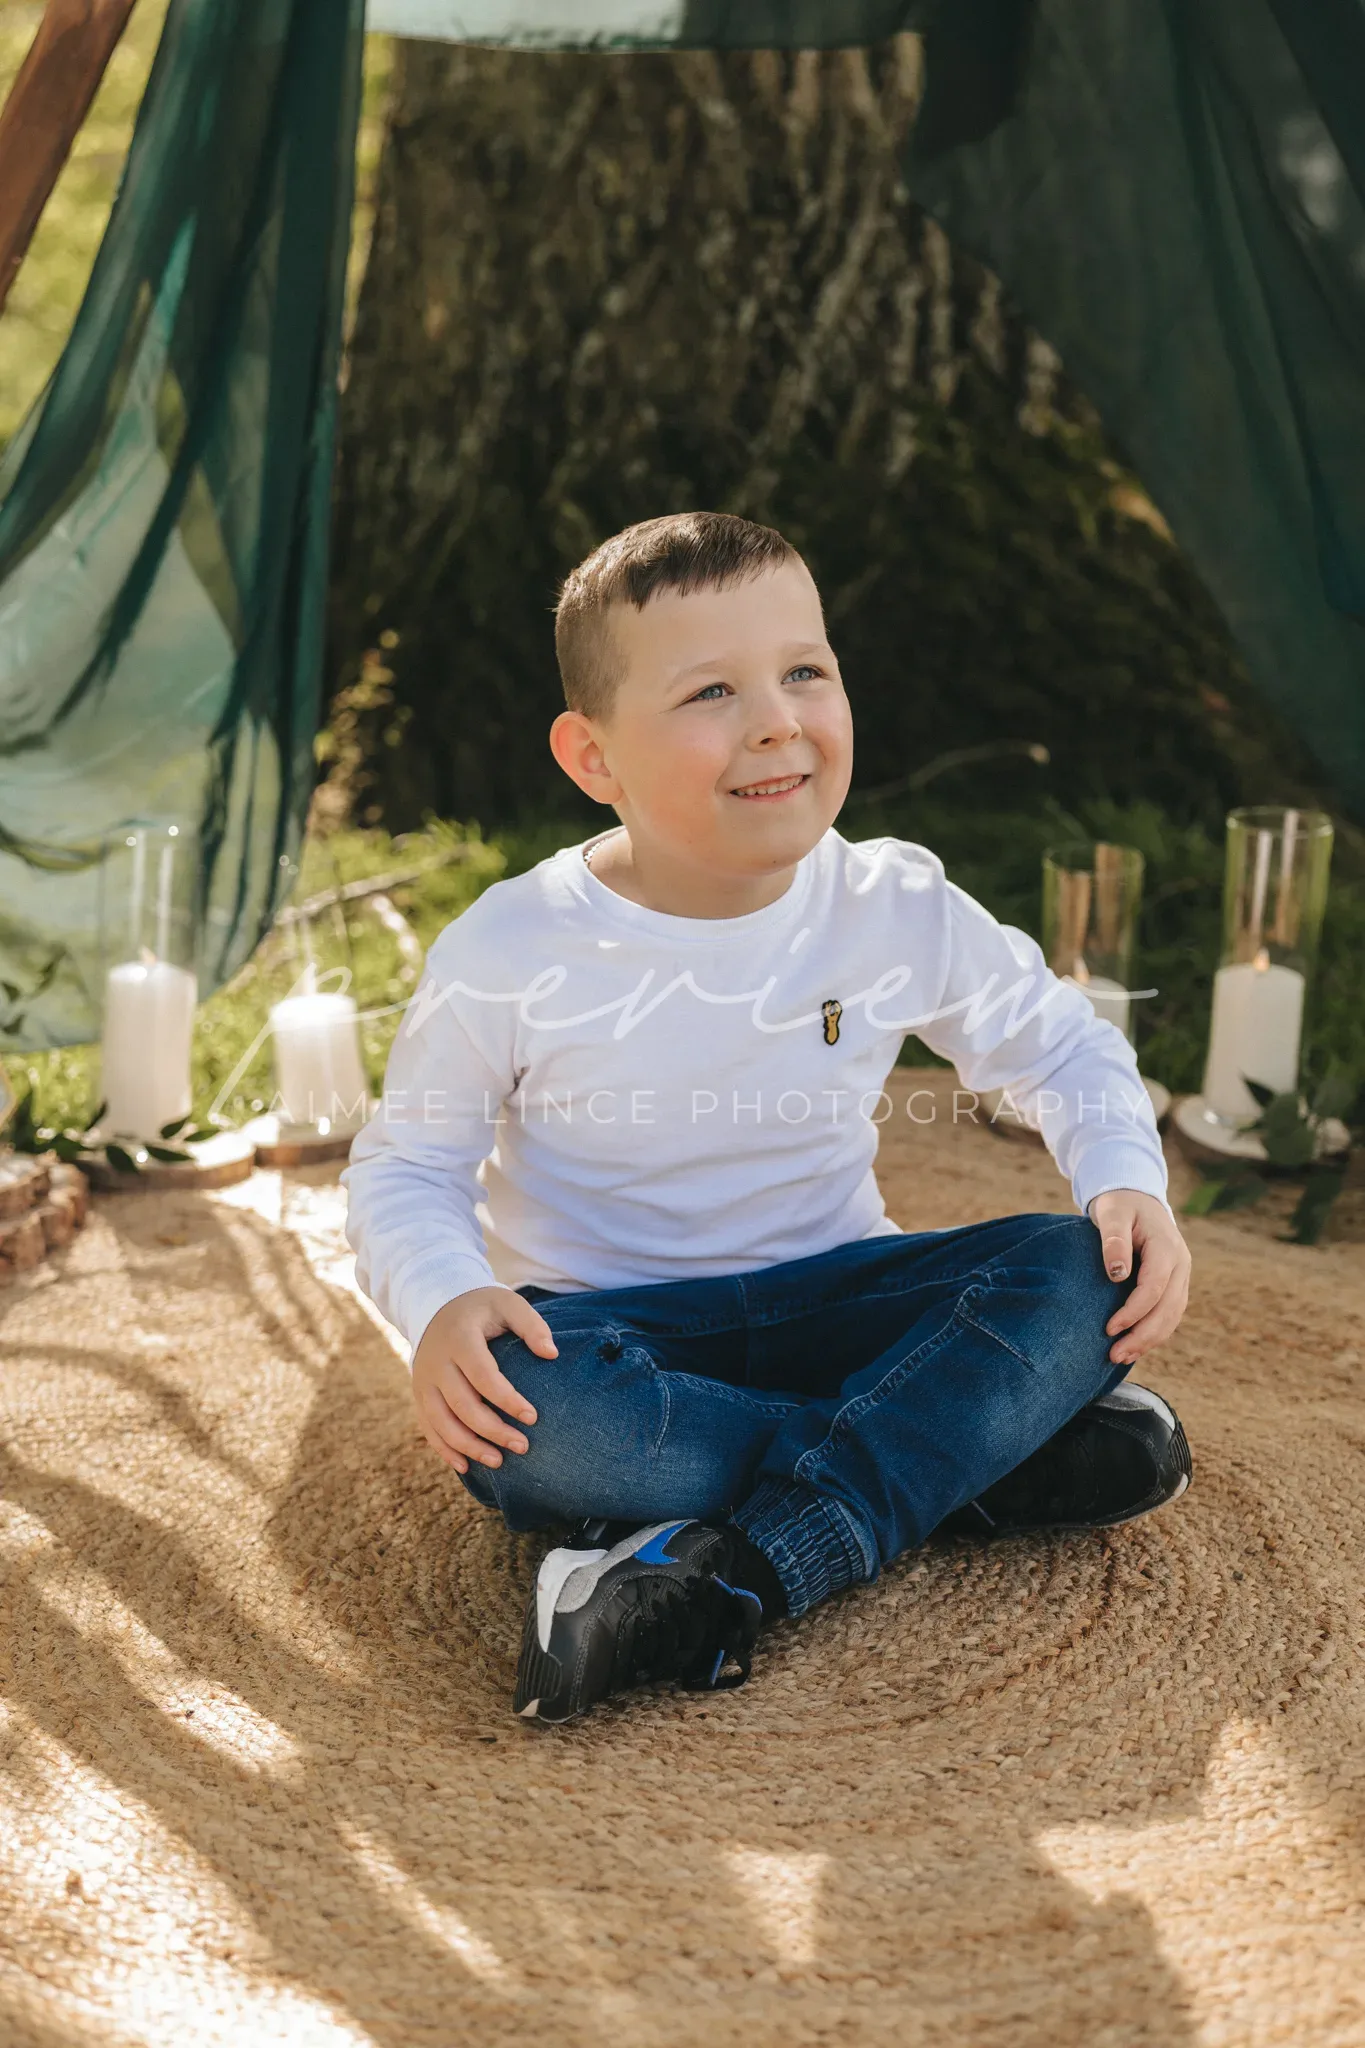 A young boy smiles while sitting cross-legged on a beige rug outdoors, surrounded by green drapes and white candles. he wears a white shirt, blue jeans, and black shoes. the sunlight filters through trees, creating a warm ambiance.